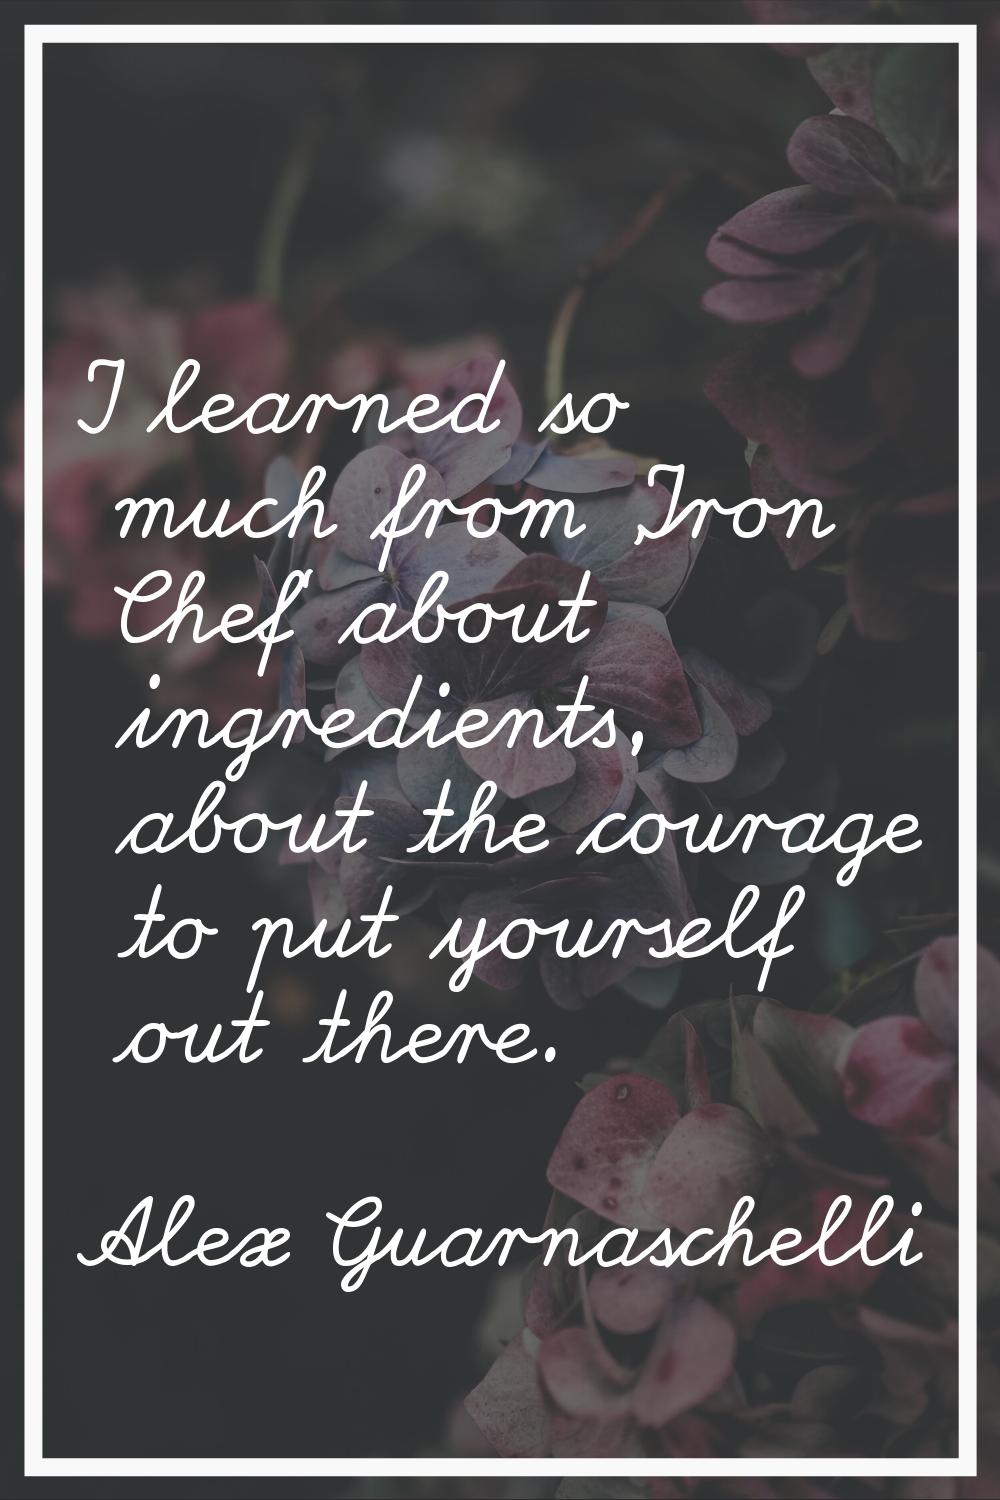 I learned so much from 'Iron Chef' about ingredients, about the courage to put yourself out there.